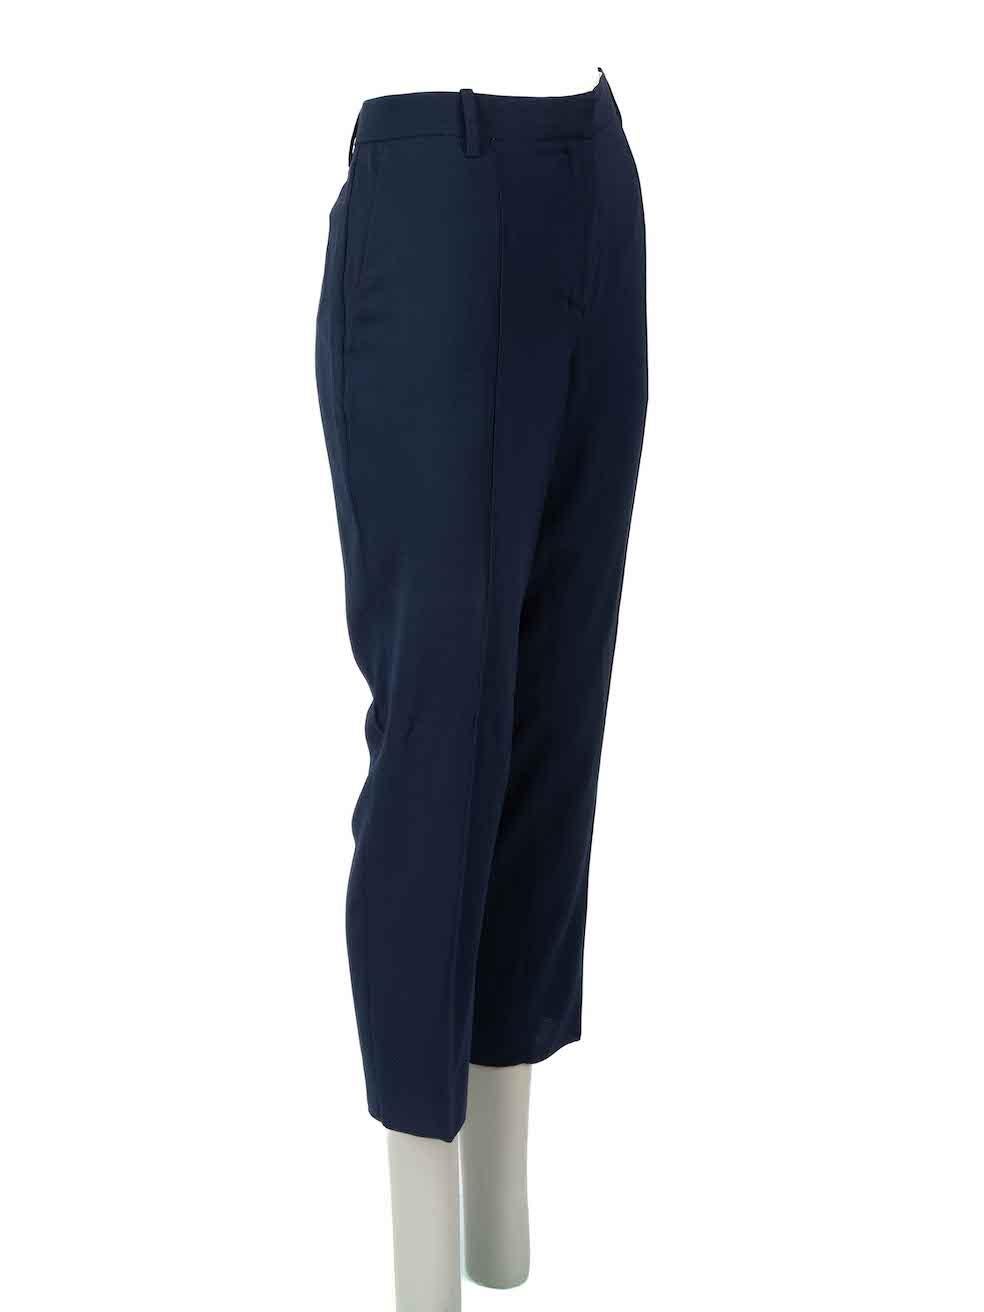 CONDITION is Very good. Hardly any visible wear to trousers is evident on this used Acne Studios designer resale item.
  
Details 
Cora Crepe
Navy
Synthetic
Trousers
Slim fit
2x Side pockets 
1x Back pocket 
Fly zip, hook and button fastening

Made